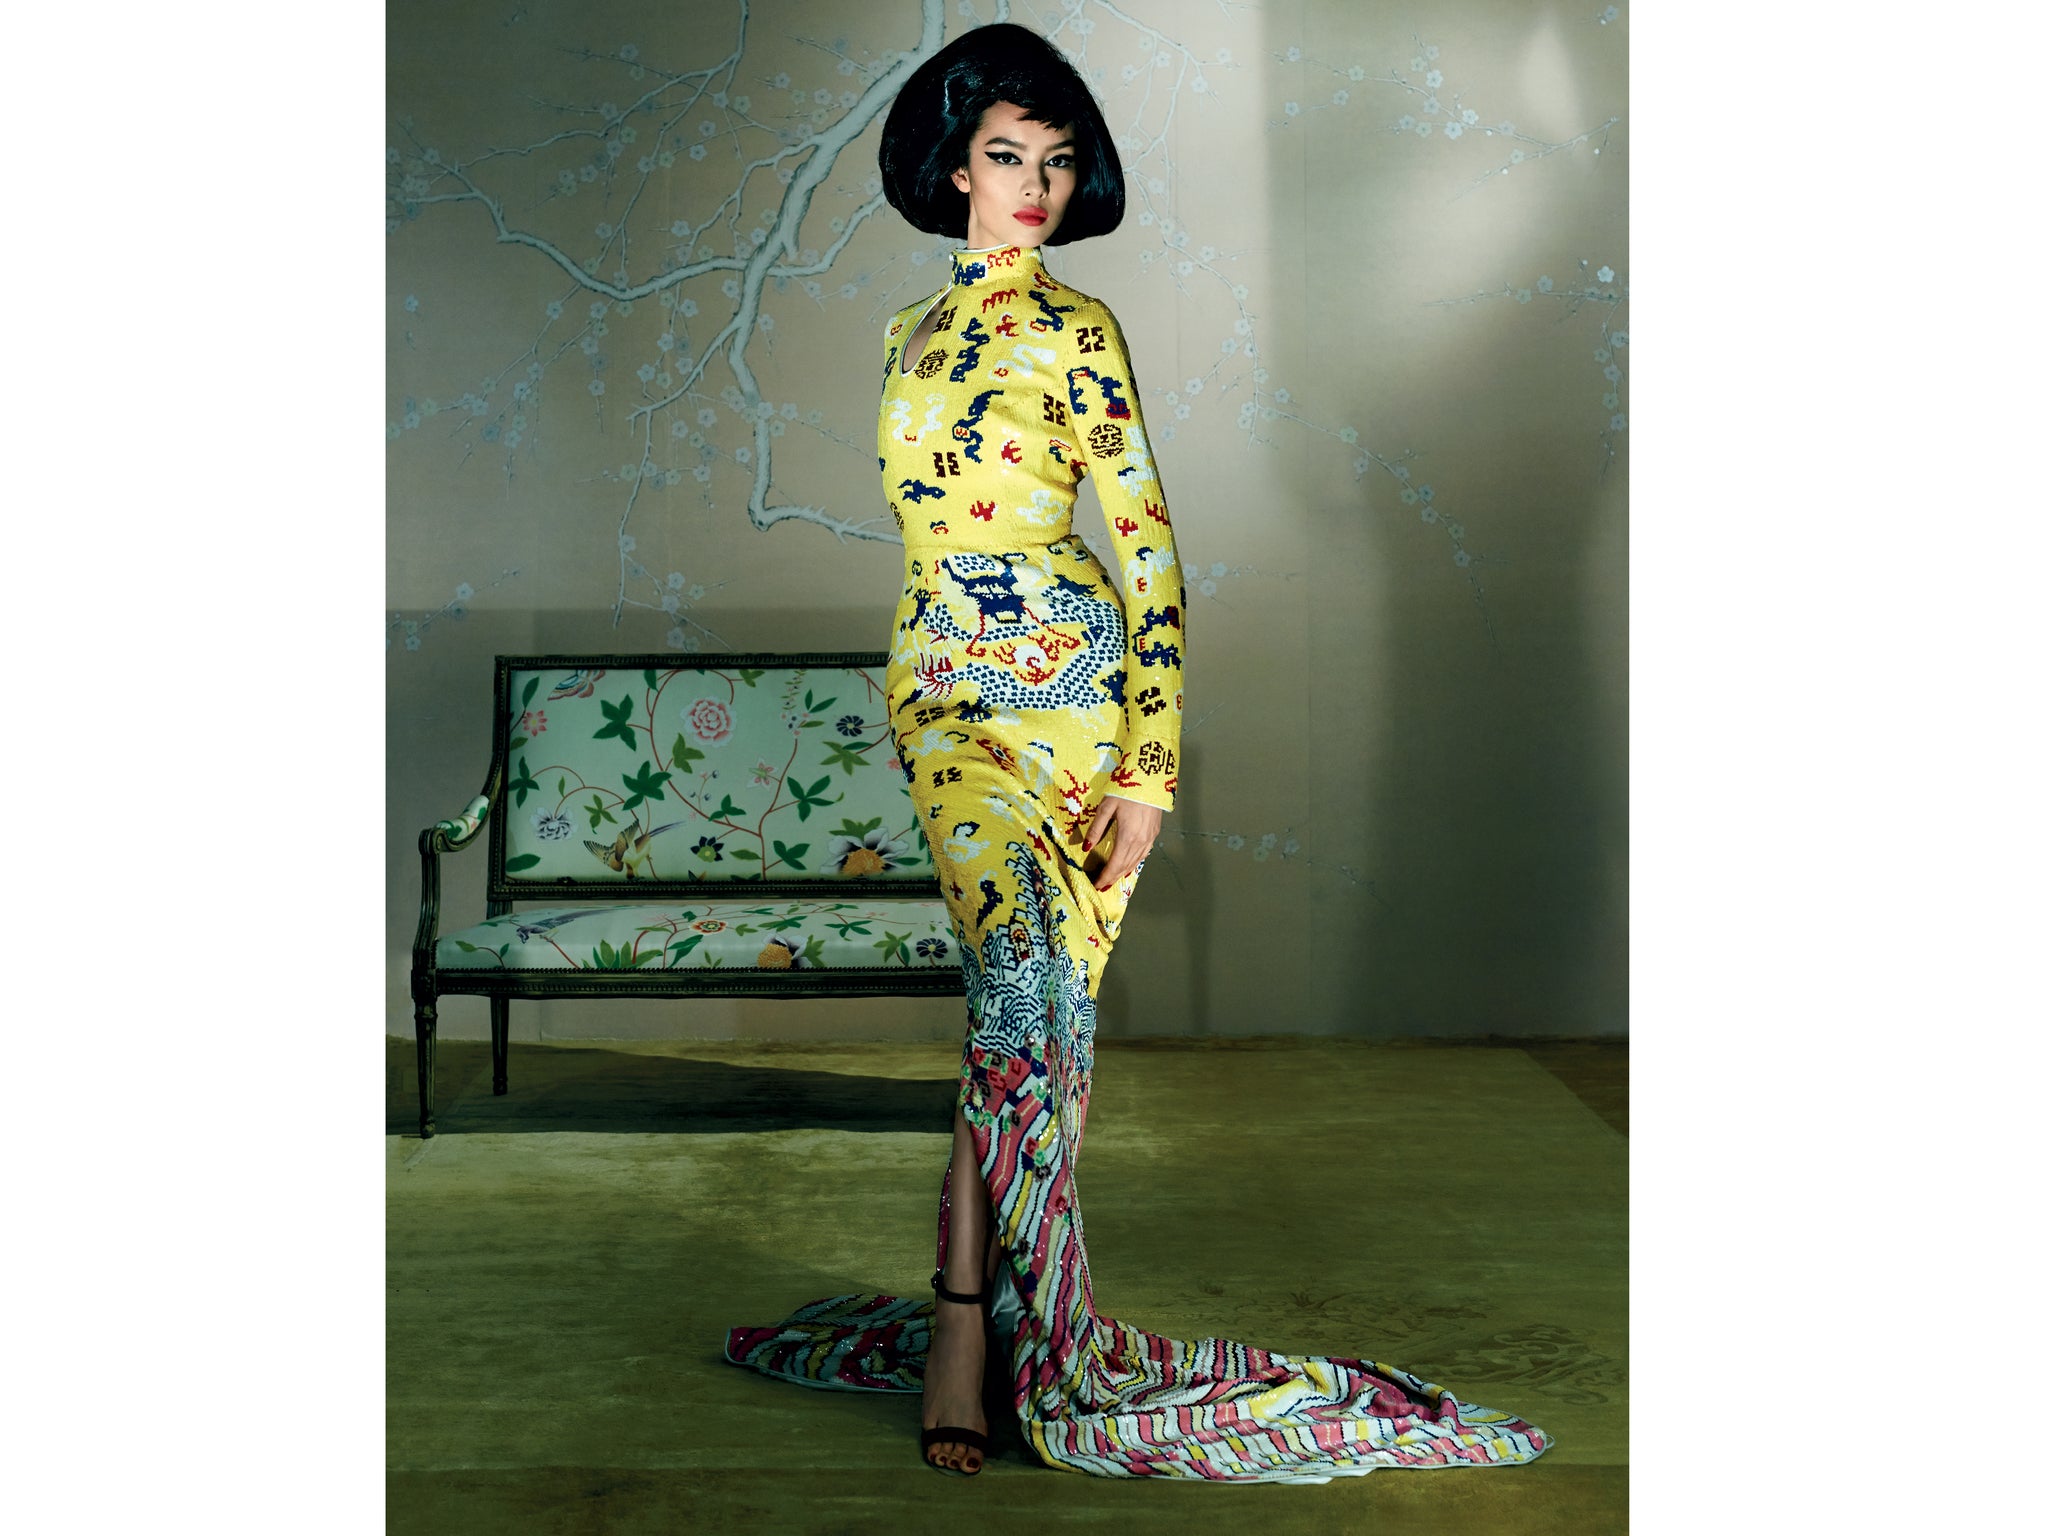 Vogue shoot looks from upcoming exhibition China: Through the Looking Glass